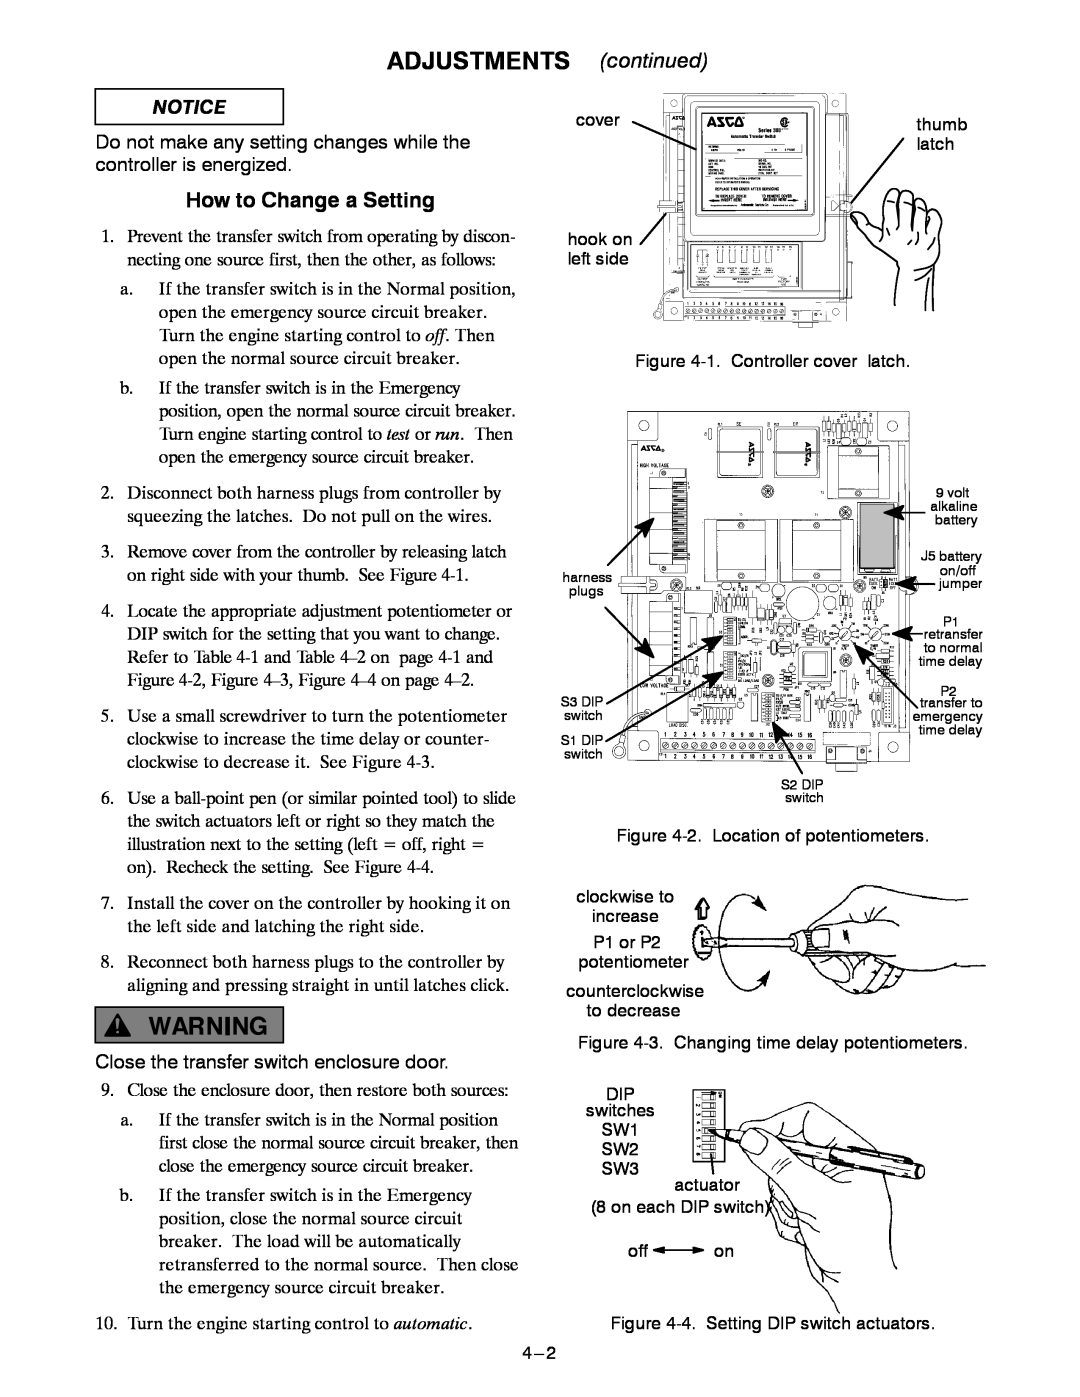 Emerson 300 manual ADJUSTMENTS continued, How to Change a Setting 